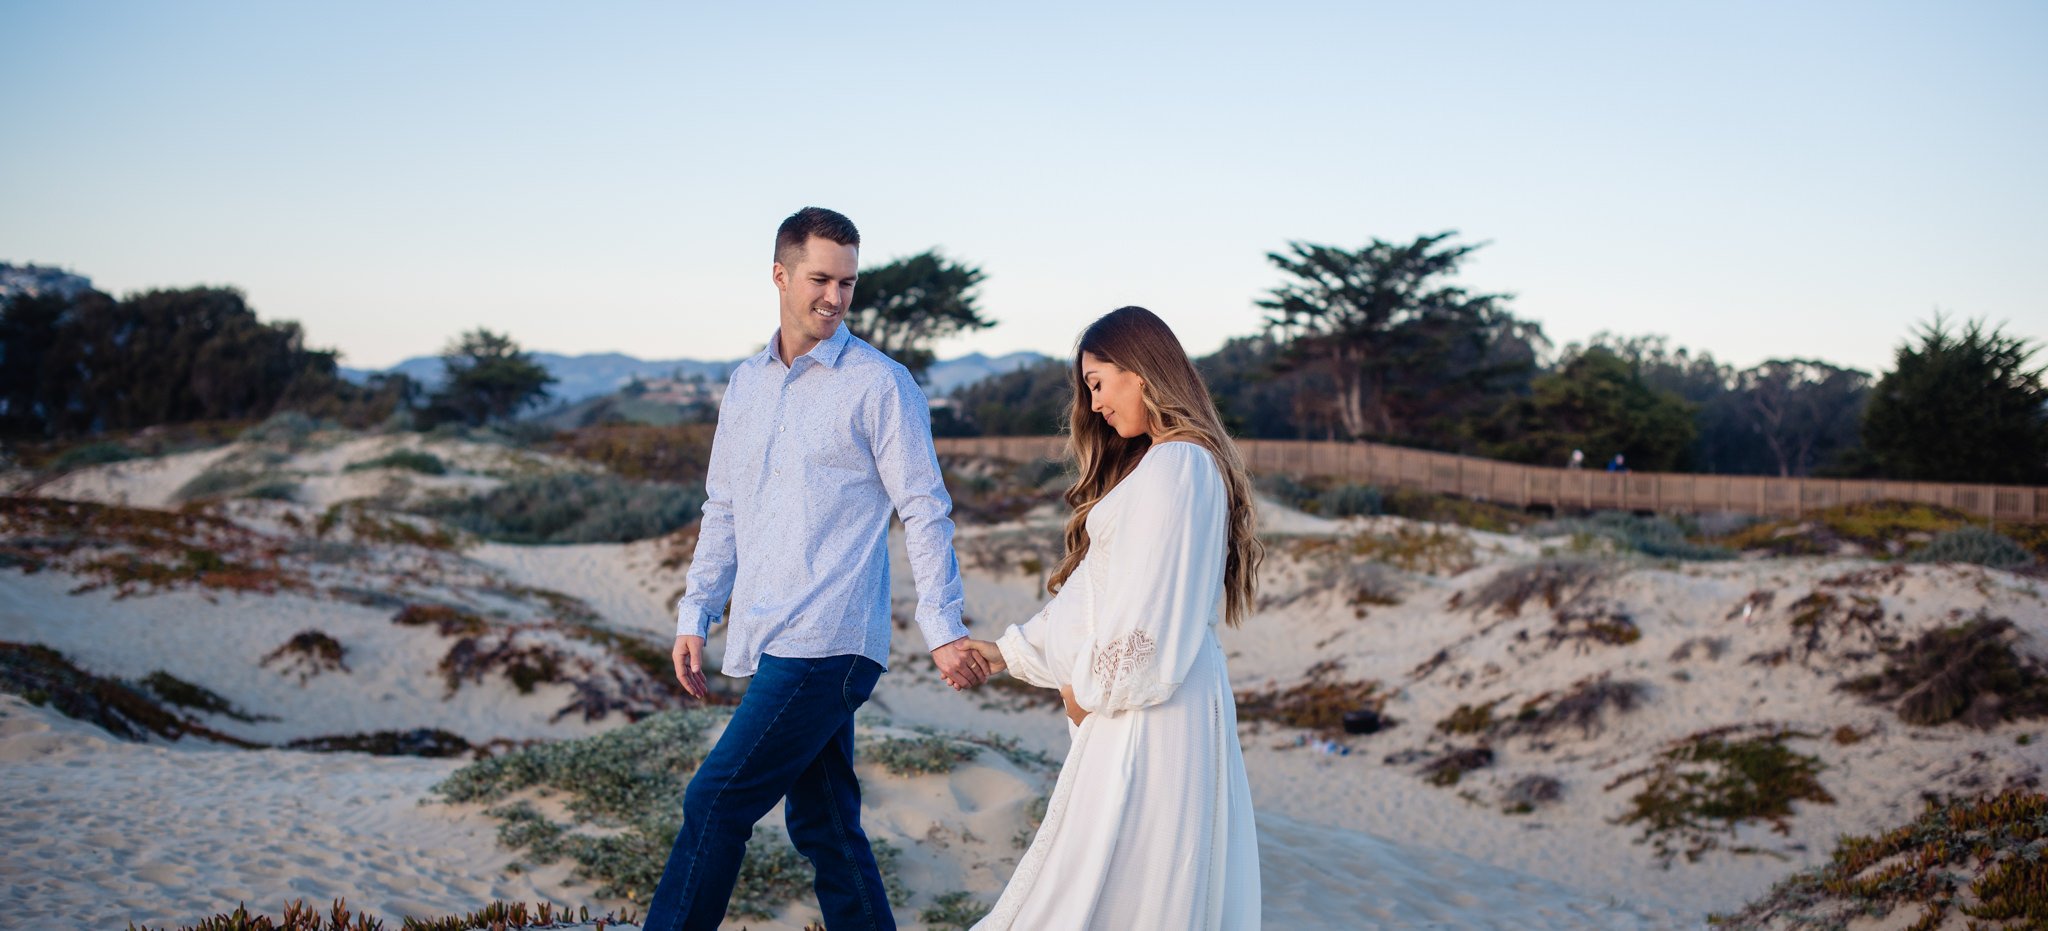 Grover Beach maternity photography session